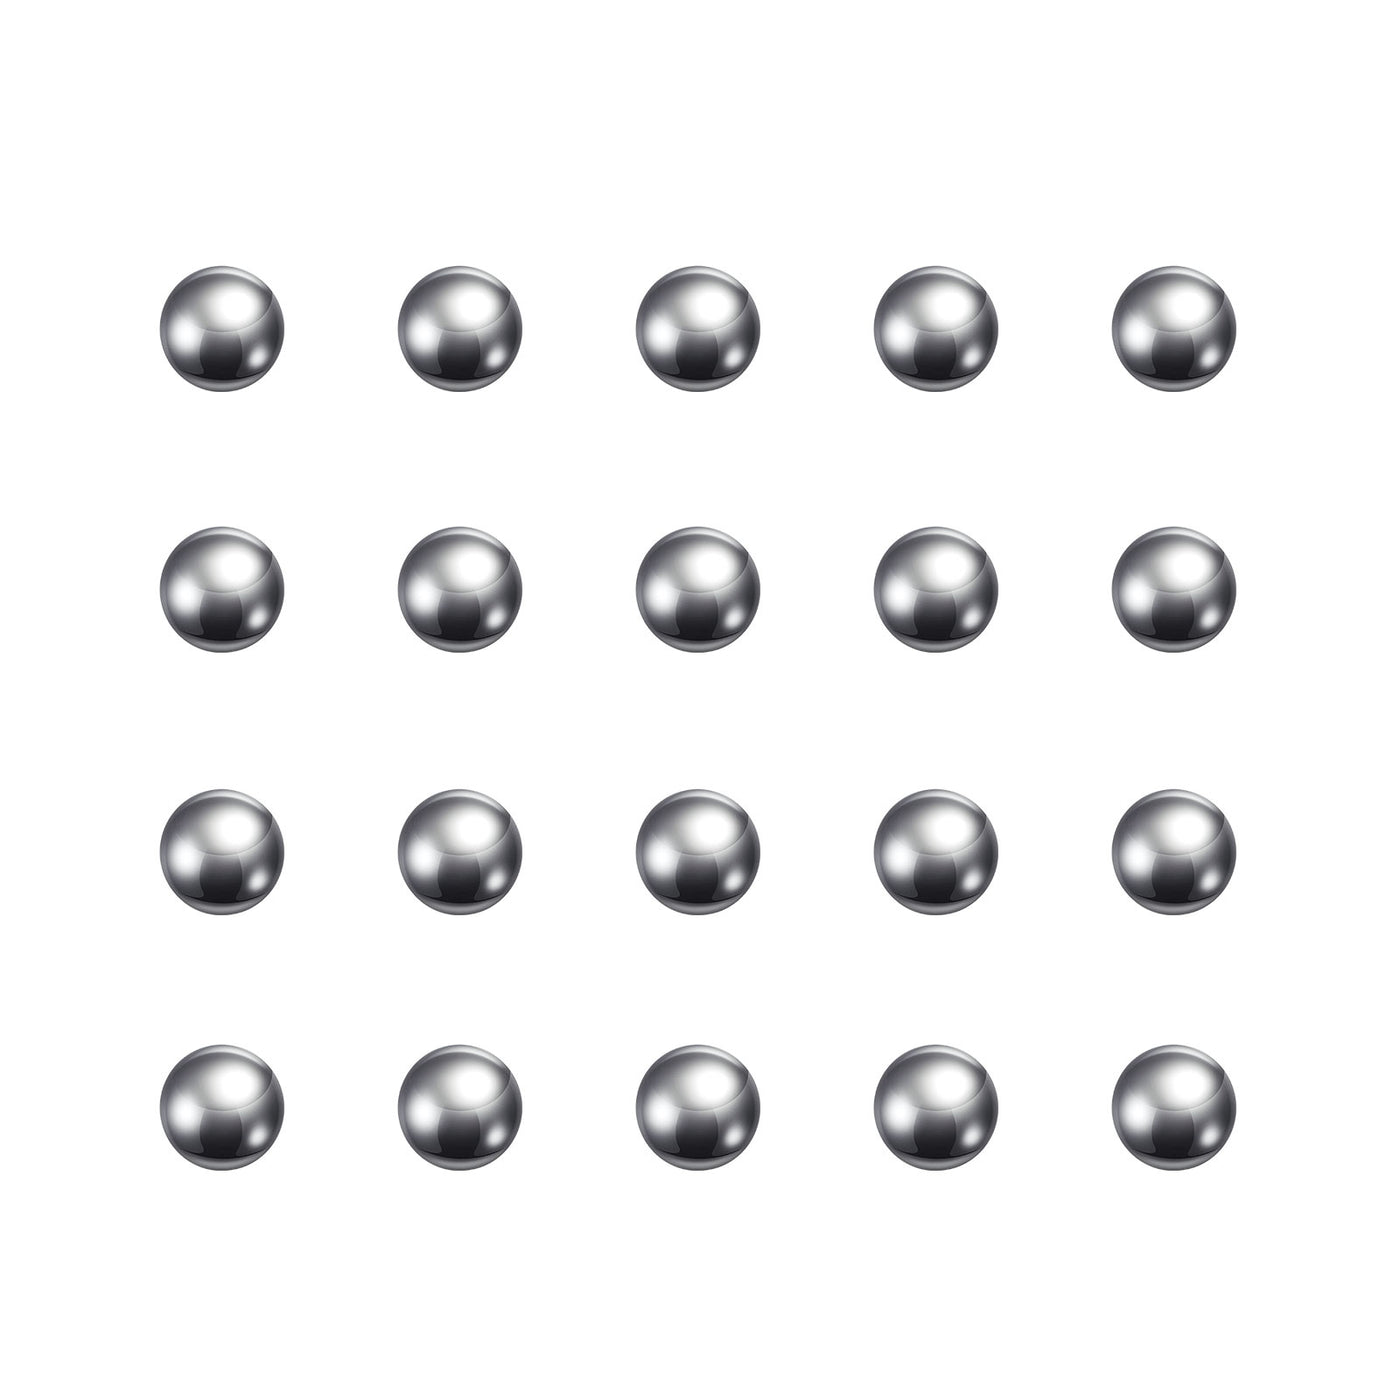 Uxcell Uxcell 10mm Carbon Steel Bearing Precision Balls for Bearings DIY Repair 500pcs